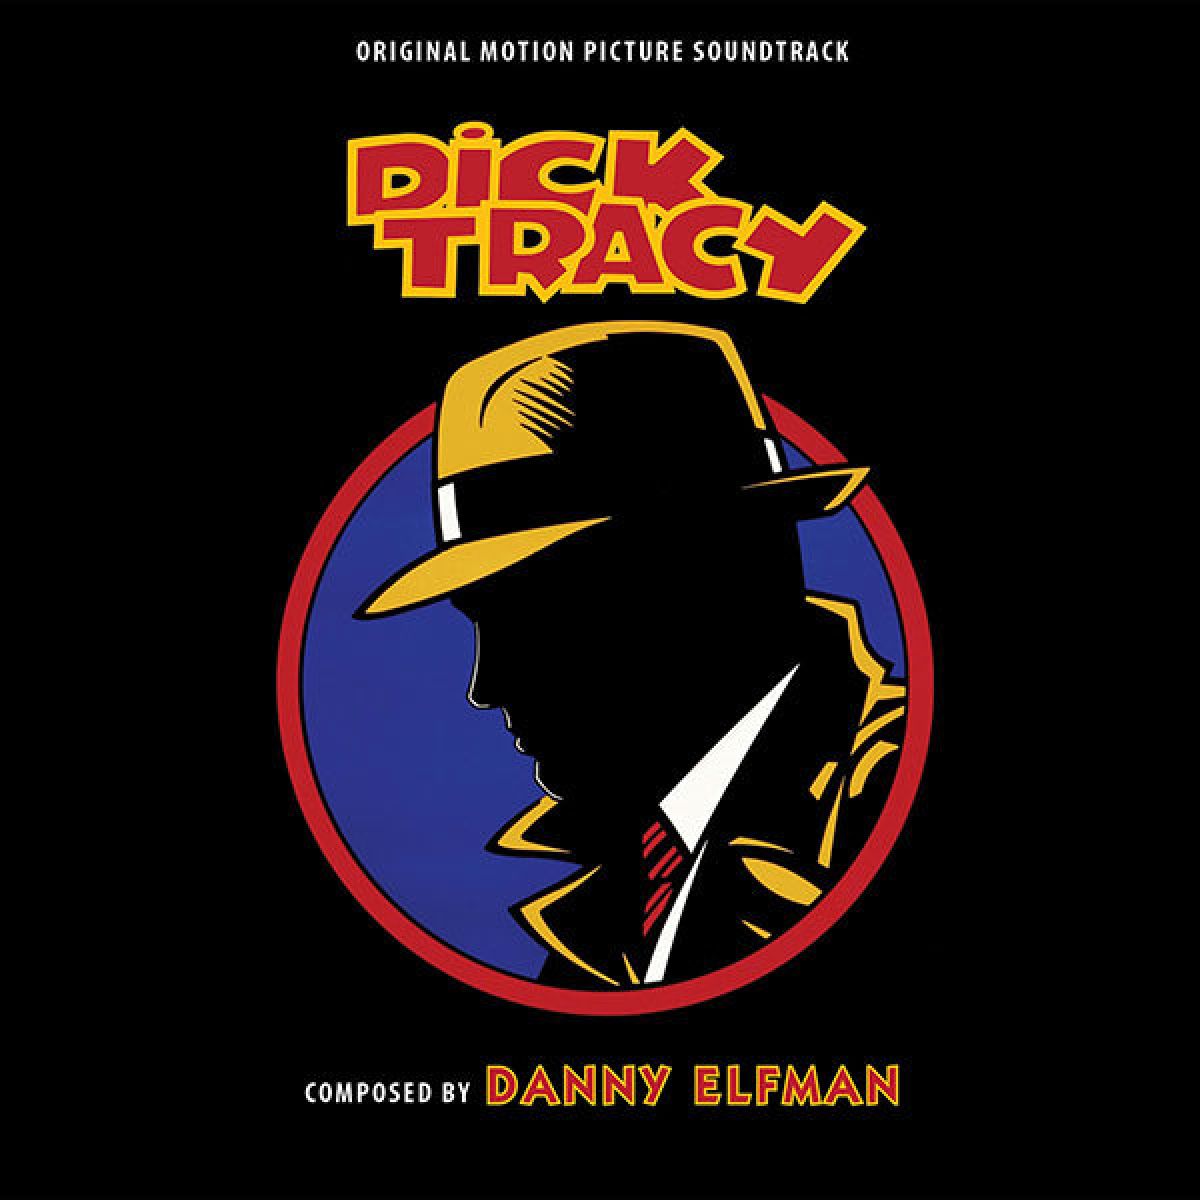 Dick tracy soundtrack i want more